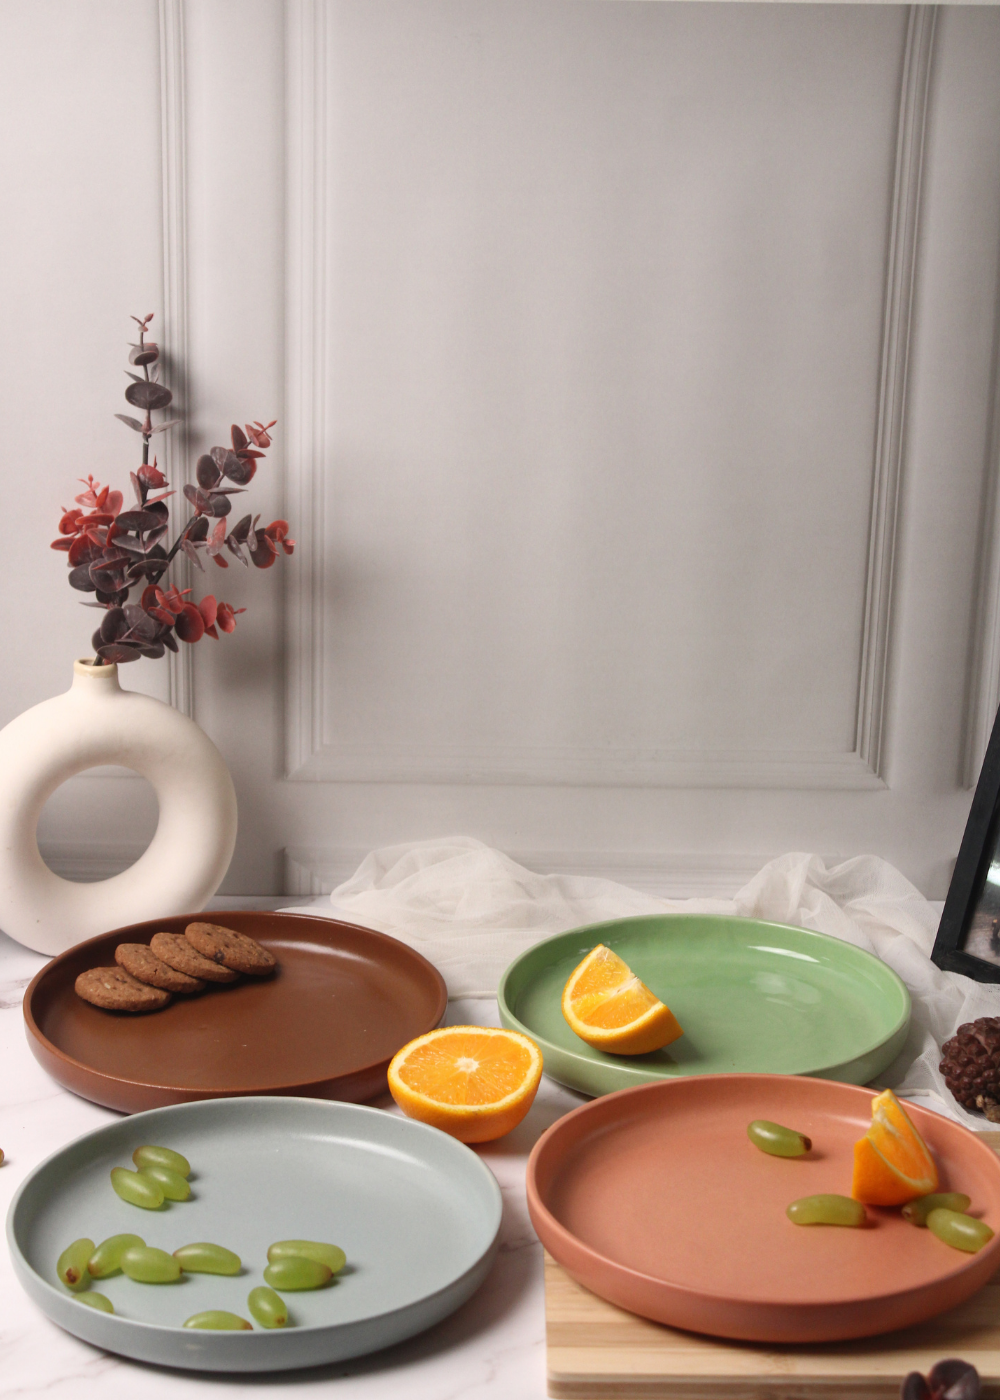 handmade mimimal platter set of four platters with different colors grey, green, pink & brown